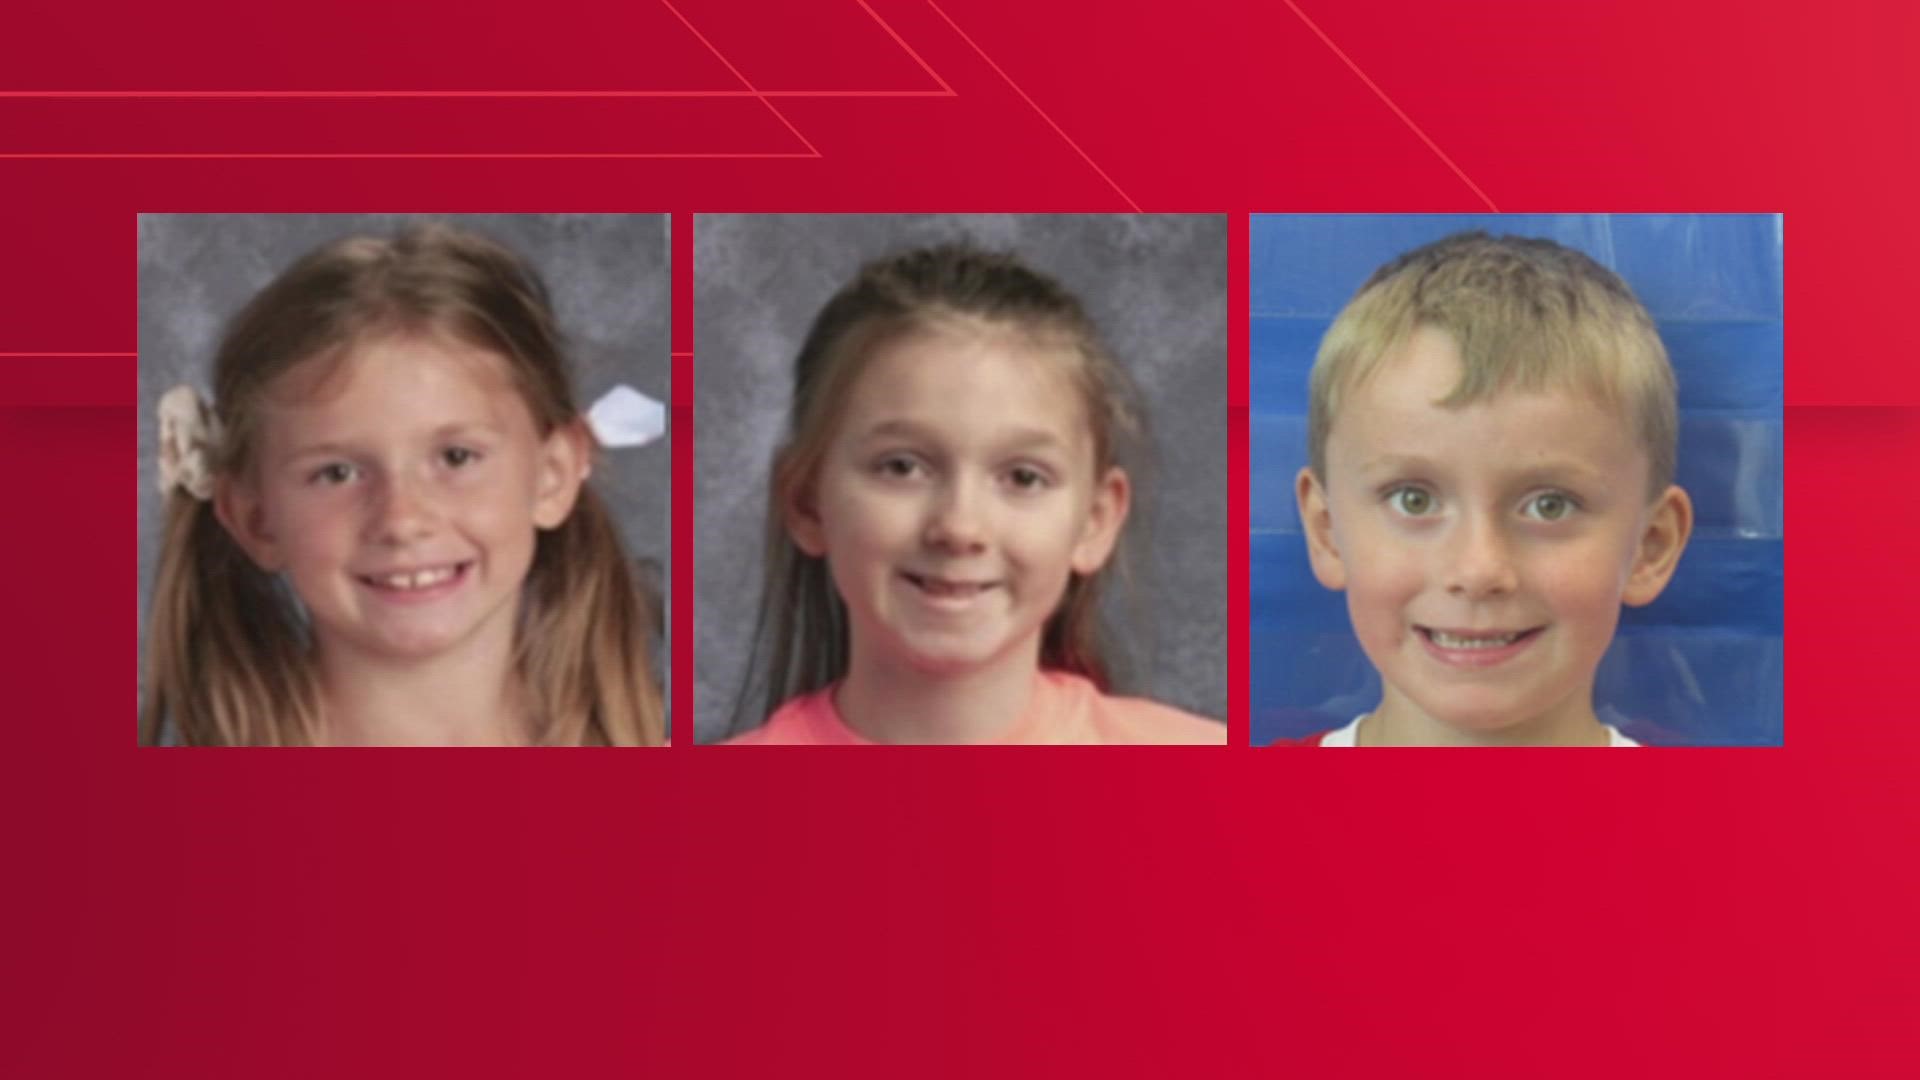 The three children are believed to be traveling with their father in a 2012 black Chevy Suburban.